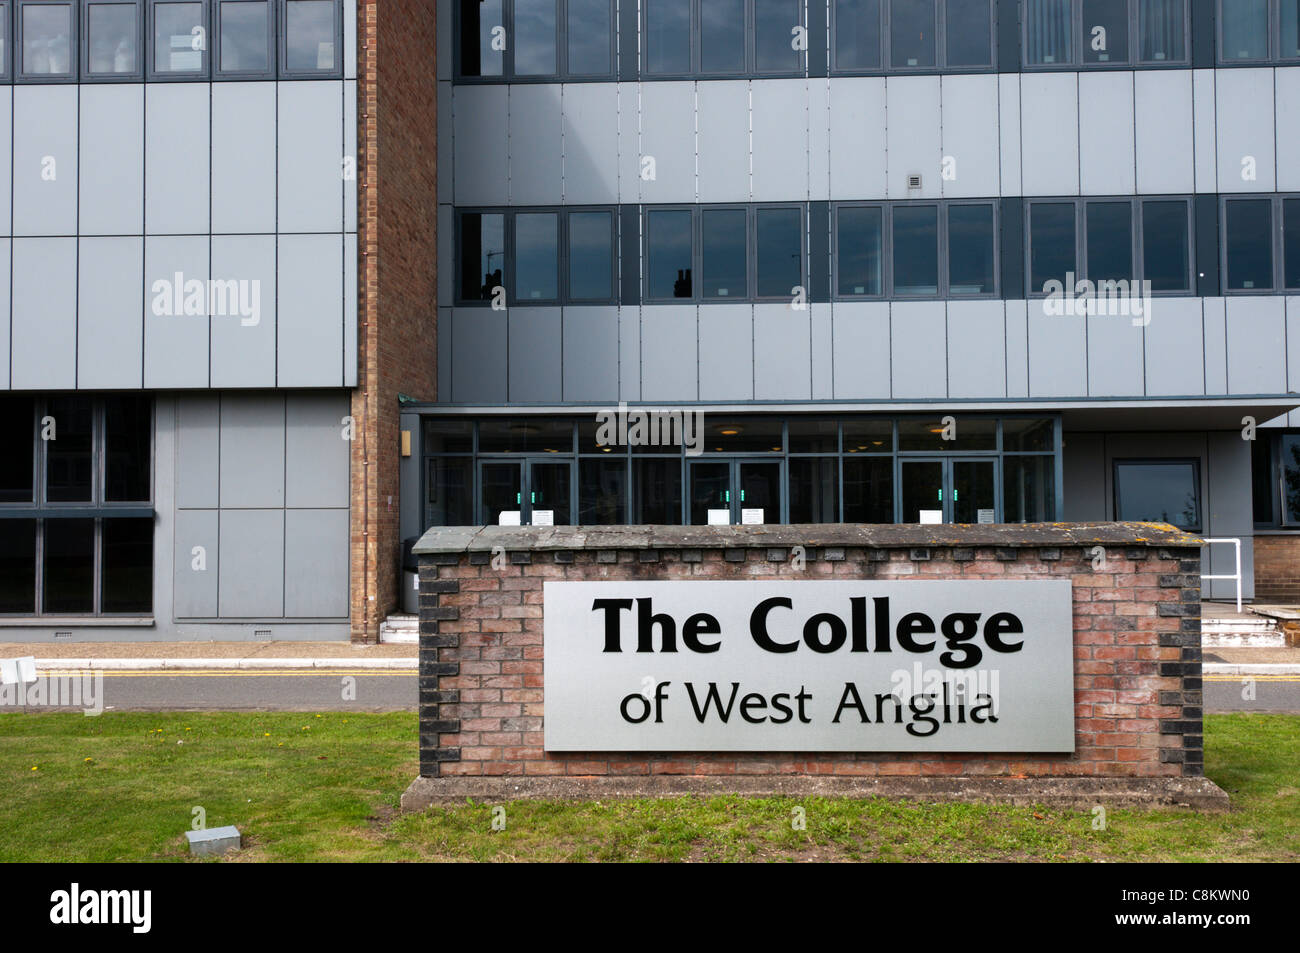 The College of West Anglia in King's Lynn, Norfolk, England Stock Photo